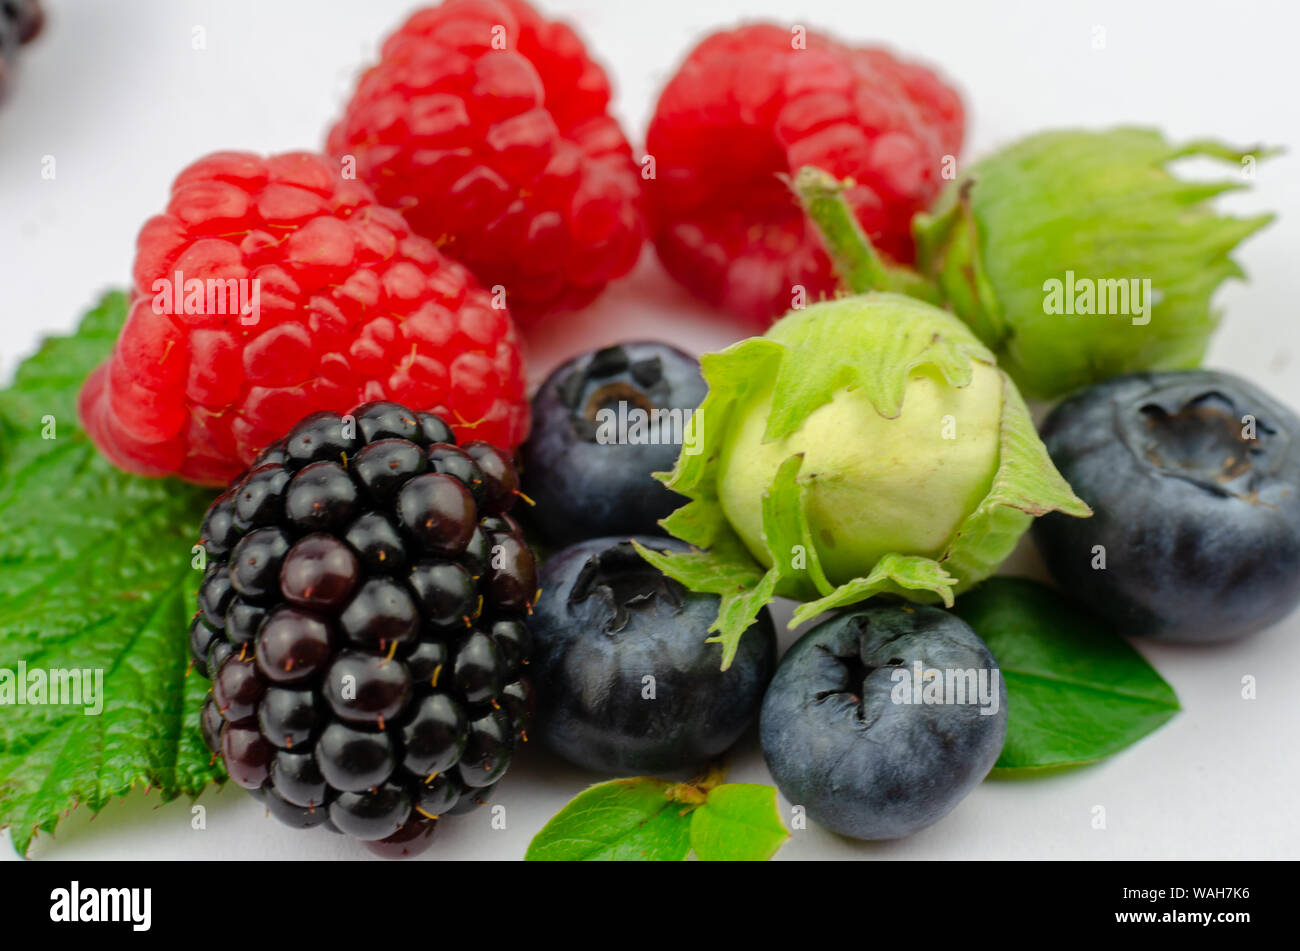 Mix of juicy forest berries and nuts: Raspberries, Blueberries, Blackberry with tiny green leaves and green hazelnuts. Close up, isolated on white. Stock Photo